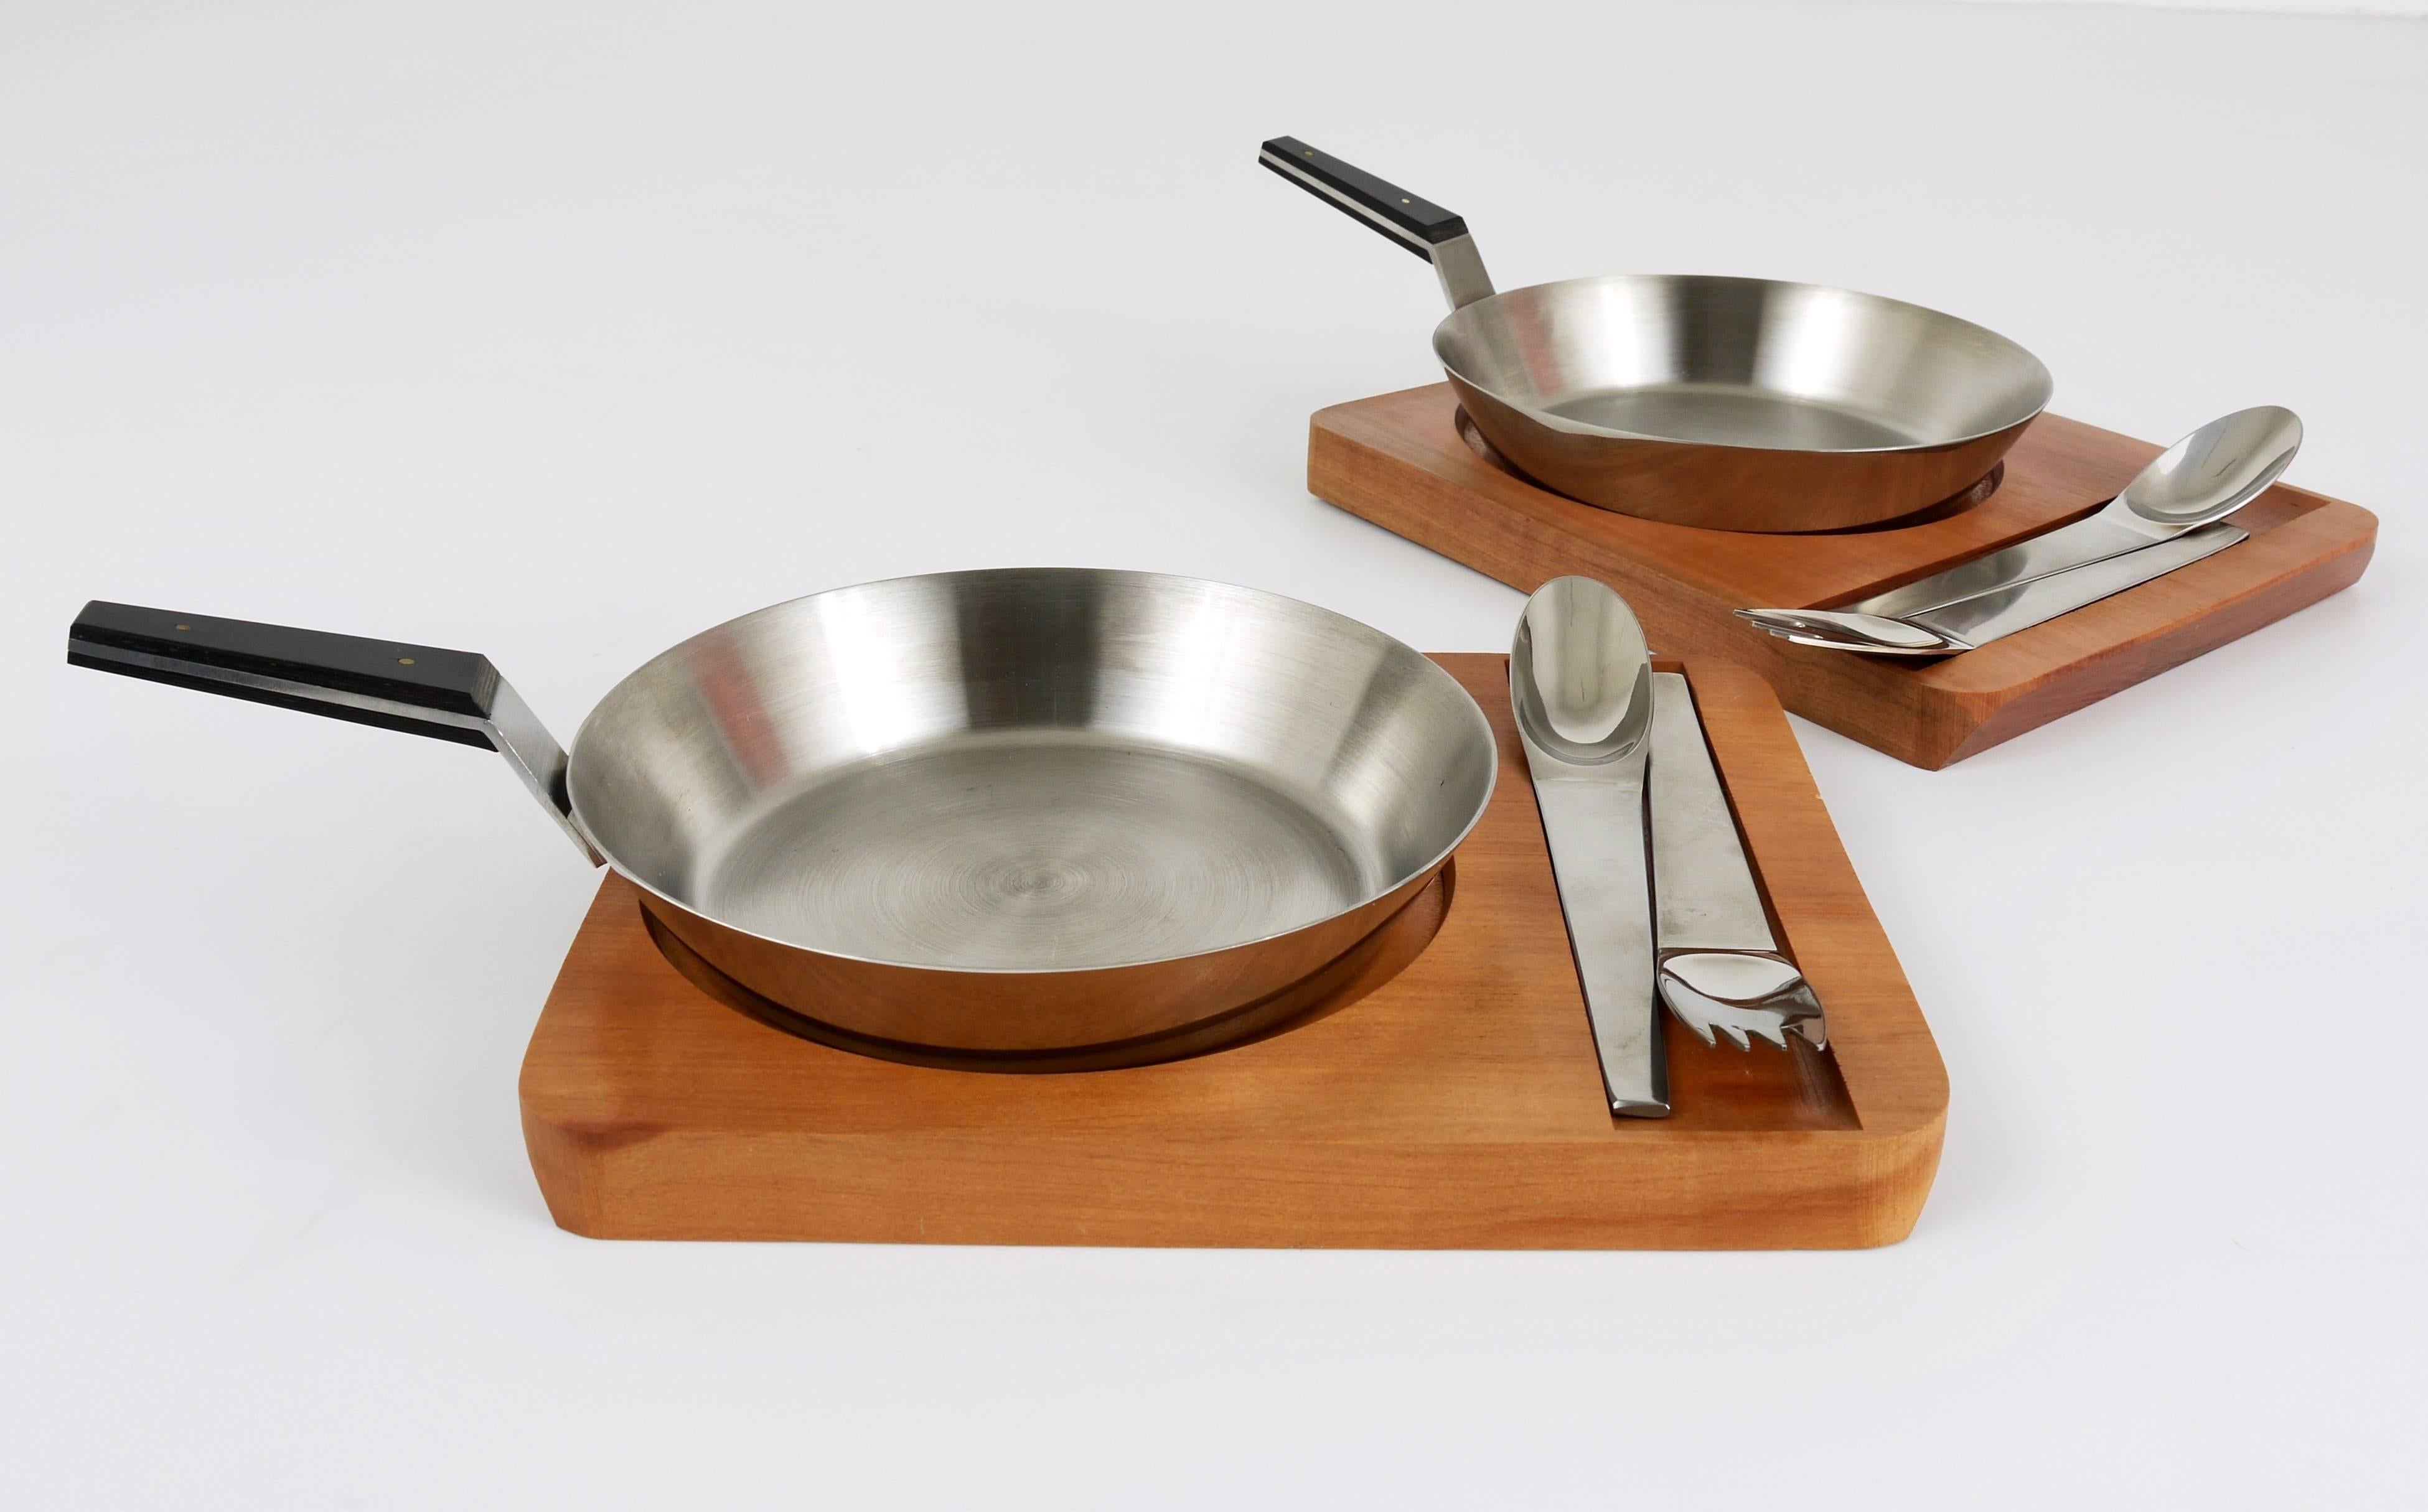 Stainless Steel Two Carl Auböck Pans, Wooden Boards and Amboss 2060 Flatware, Austria, 1950s